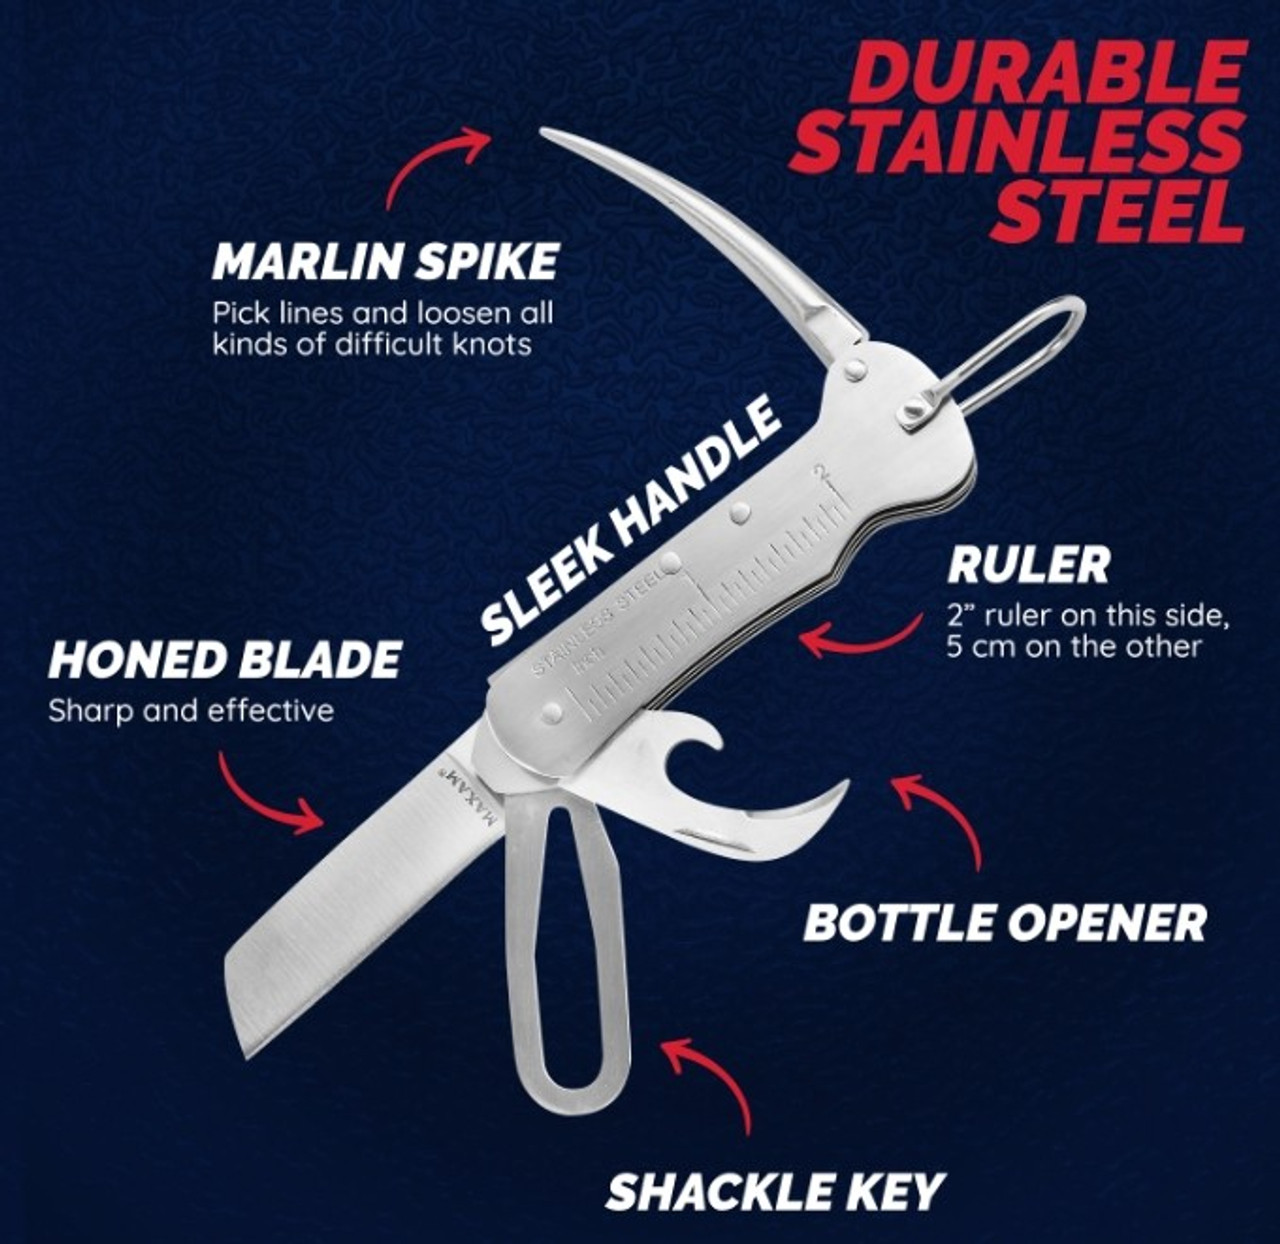 CLASSIC SAILING KNIFE STAINLESS STEEL